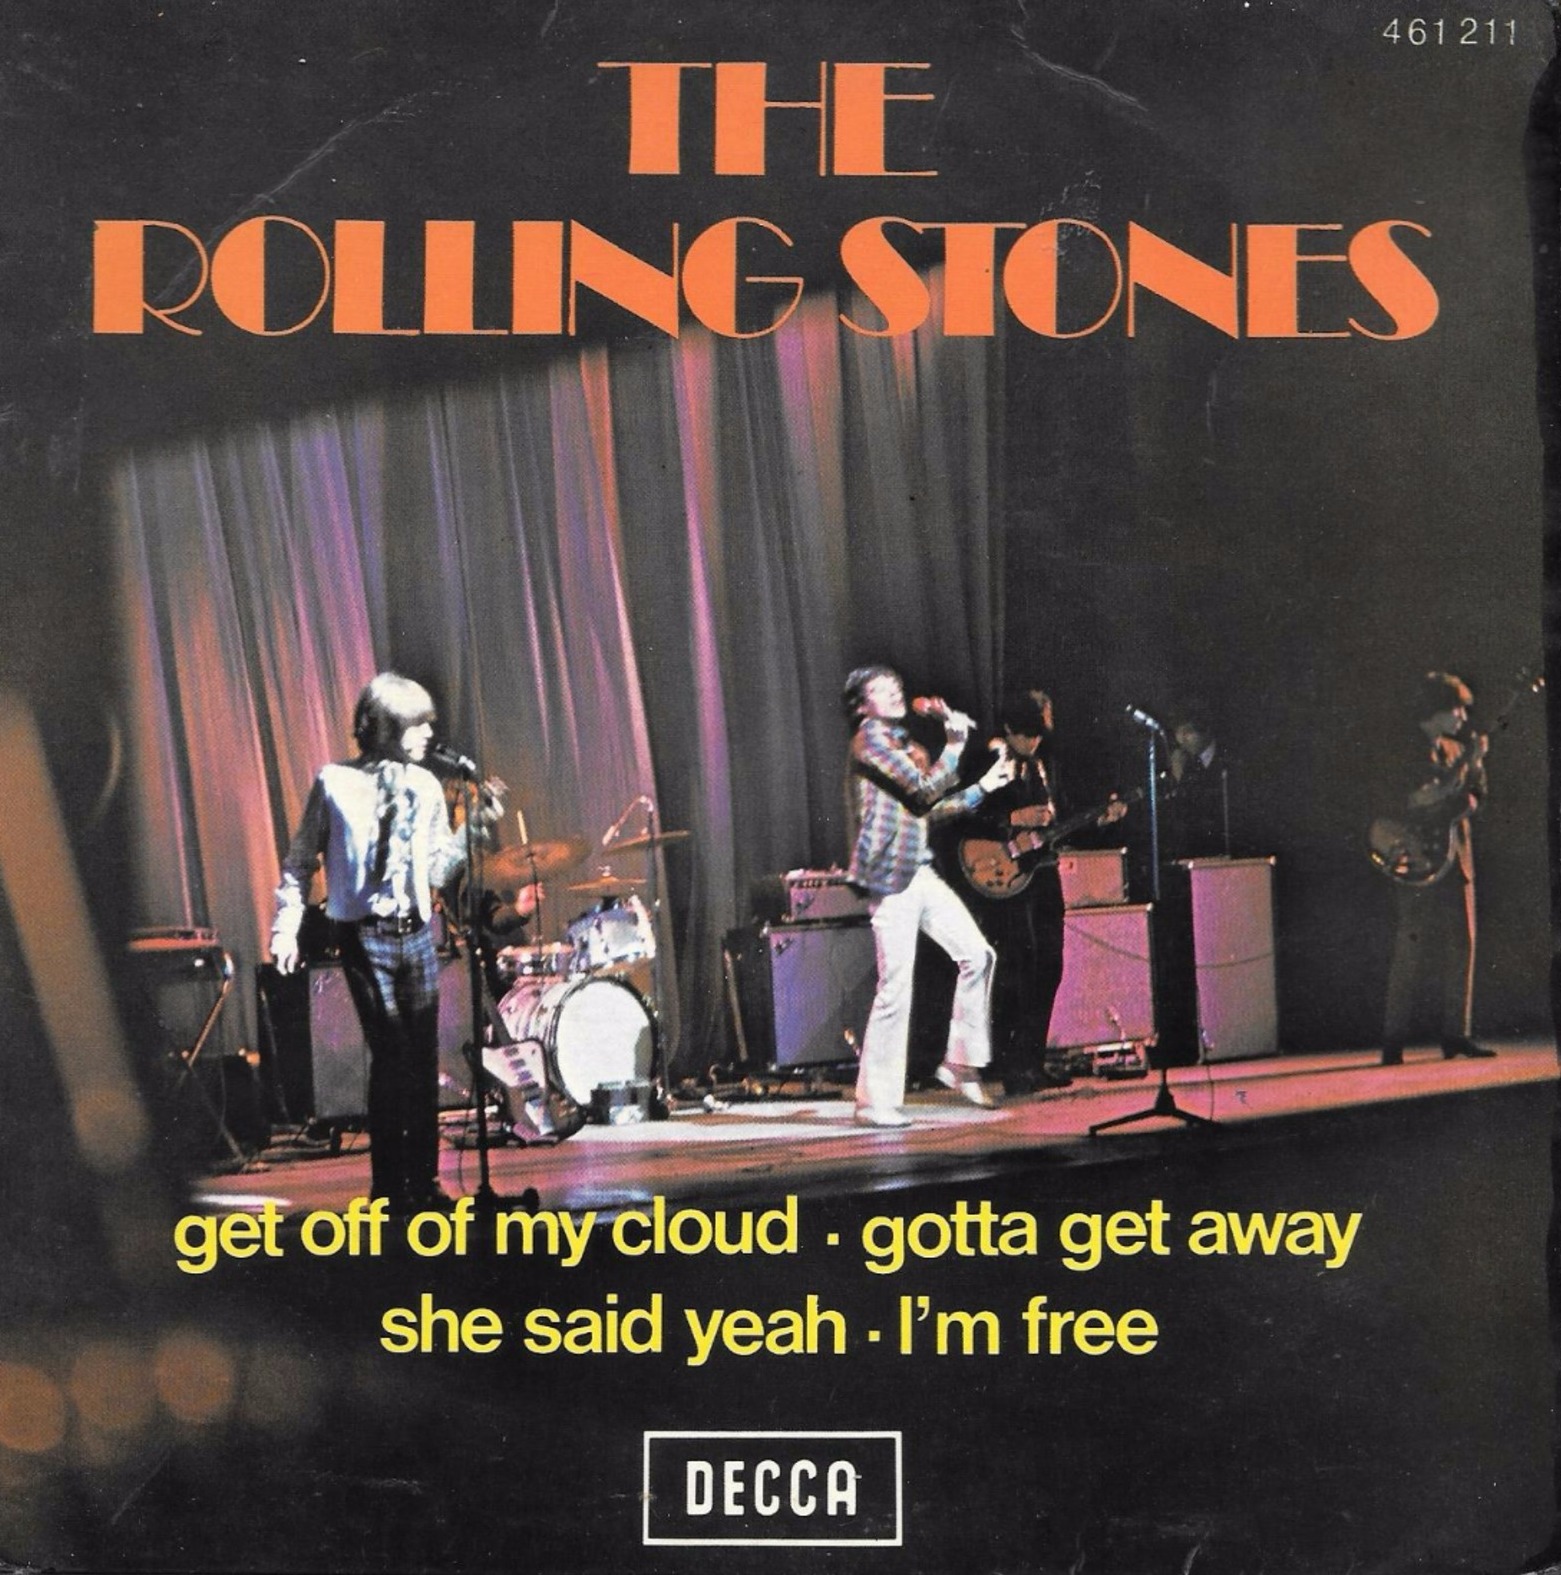 Rolling stones get. Get off of my cloud the Rolling Stones. Rolling Stones she said yeah аккорды.